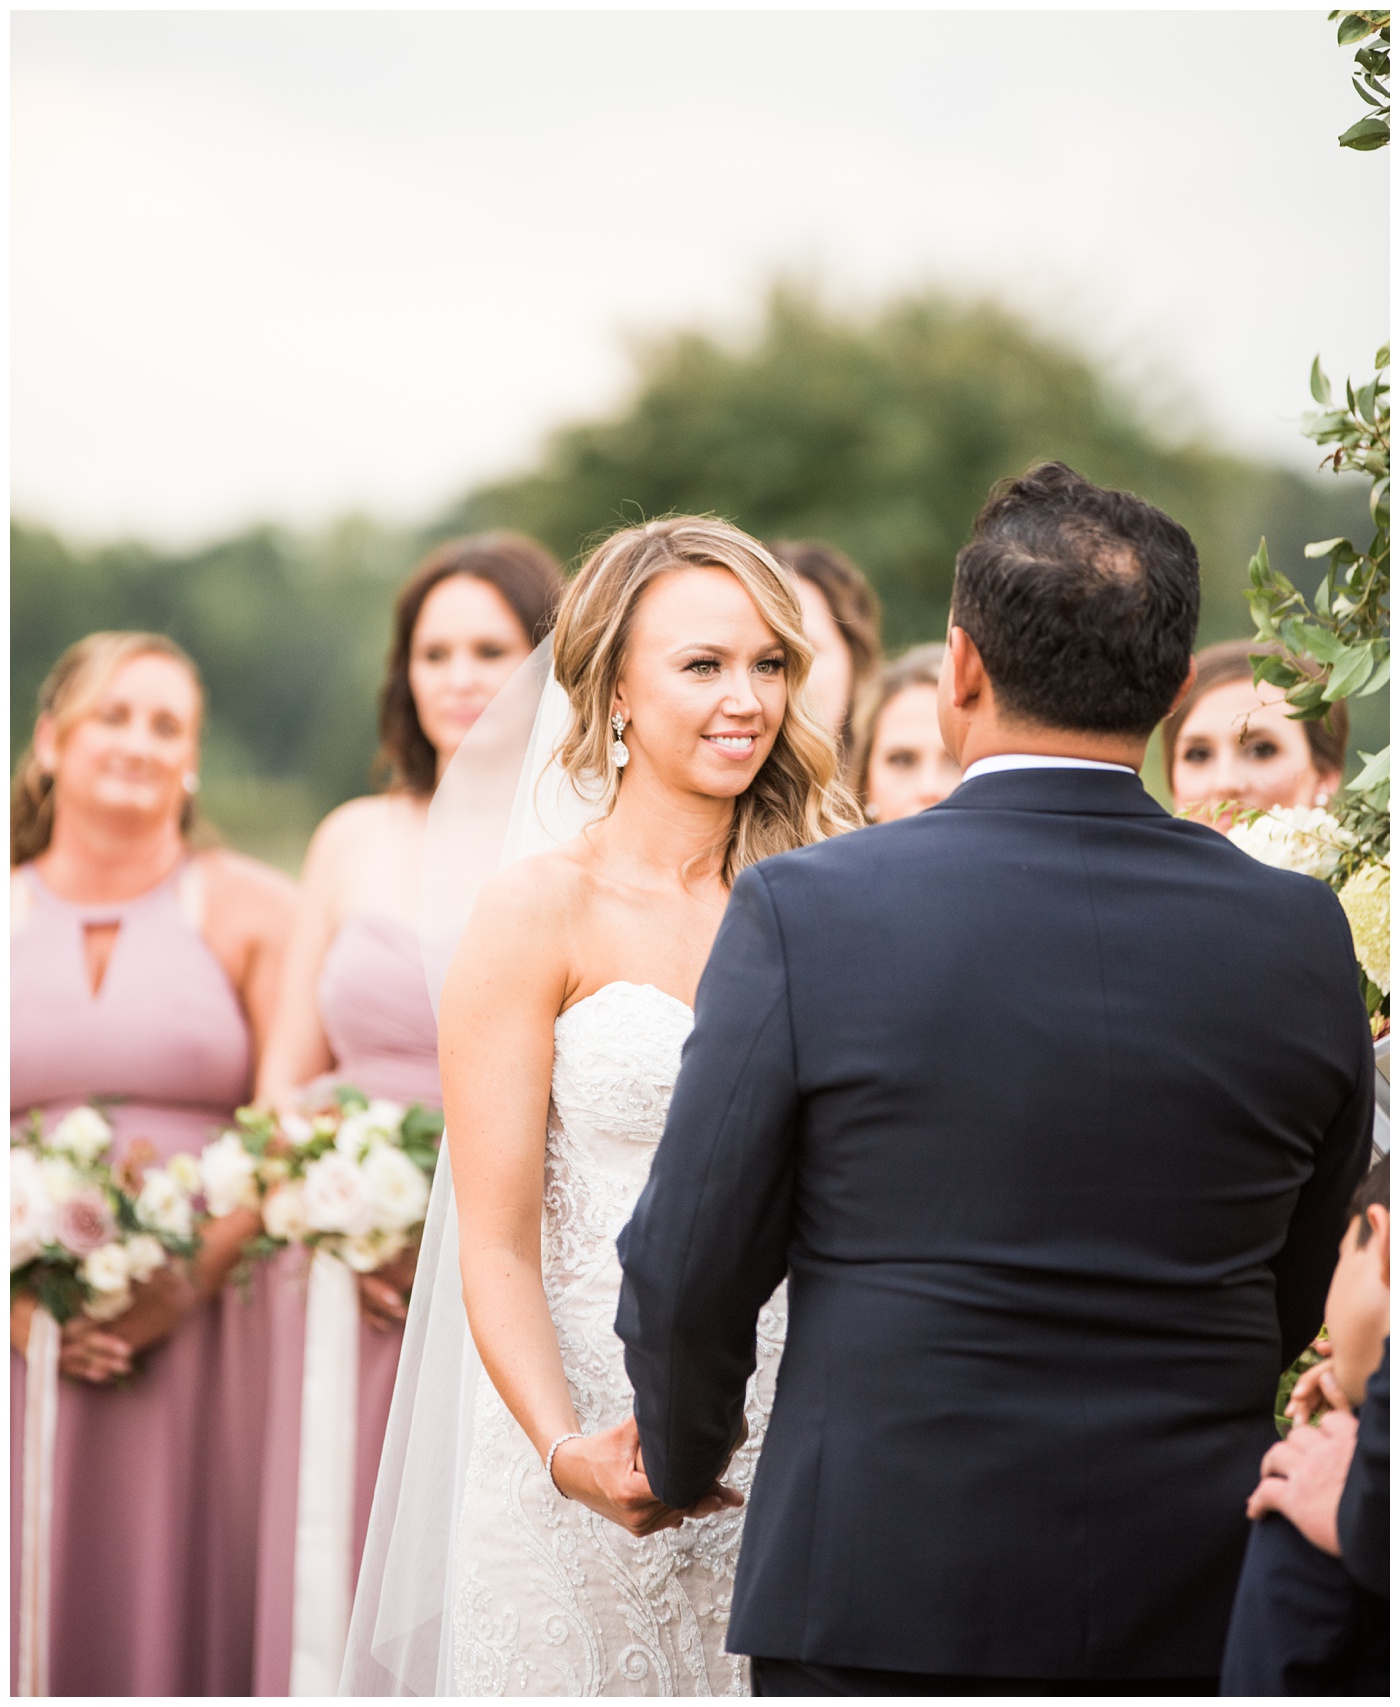 Bride and groom ceremony at King Family Vineyard in Charlottesville VA 